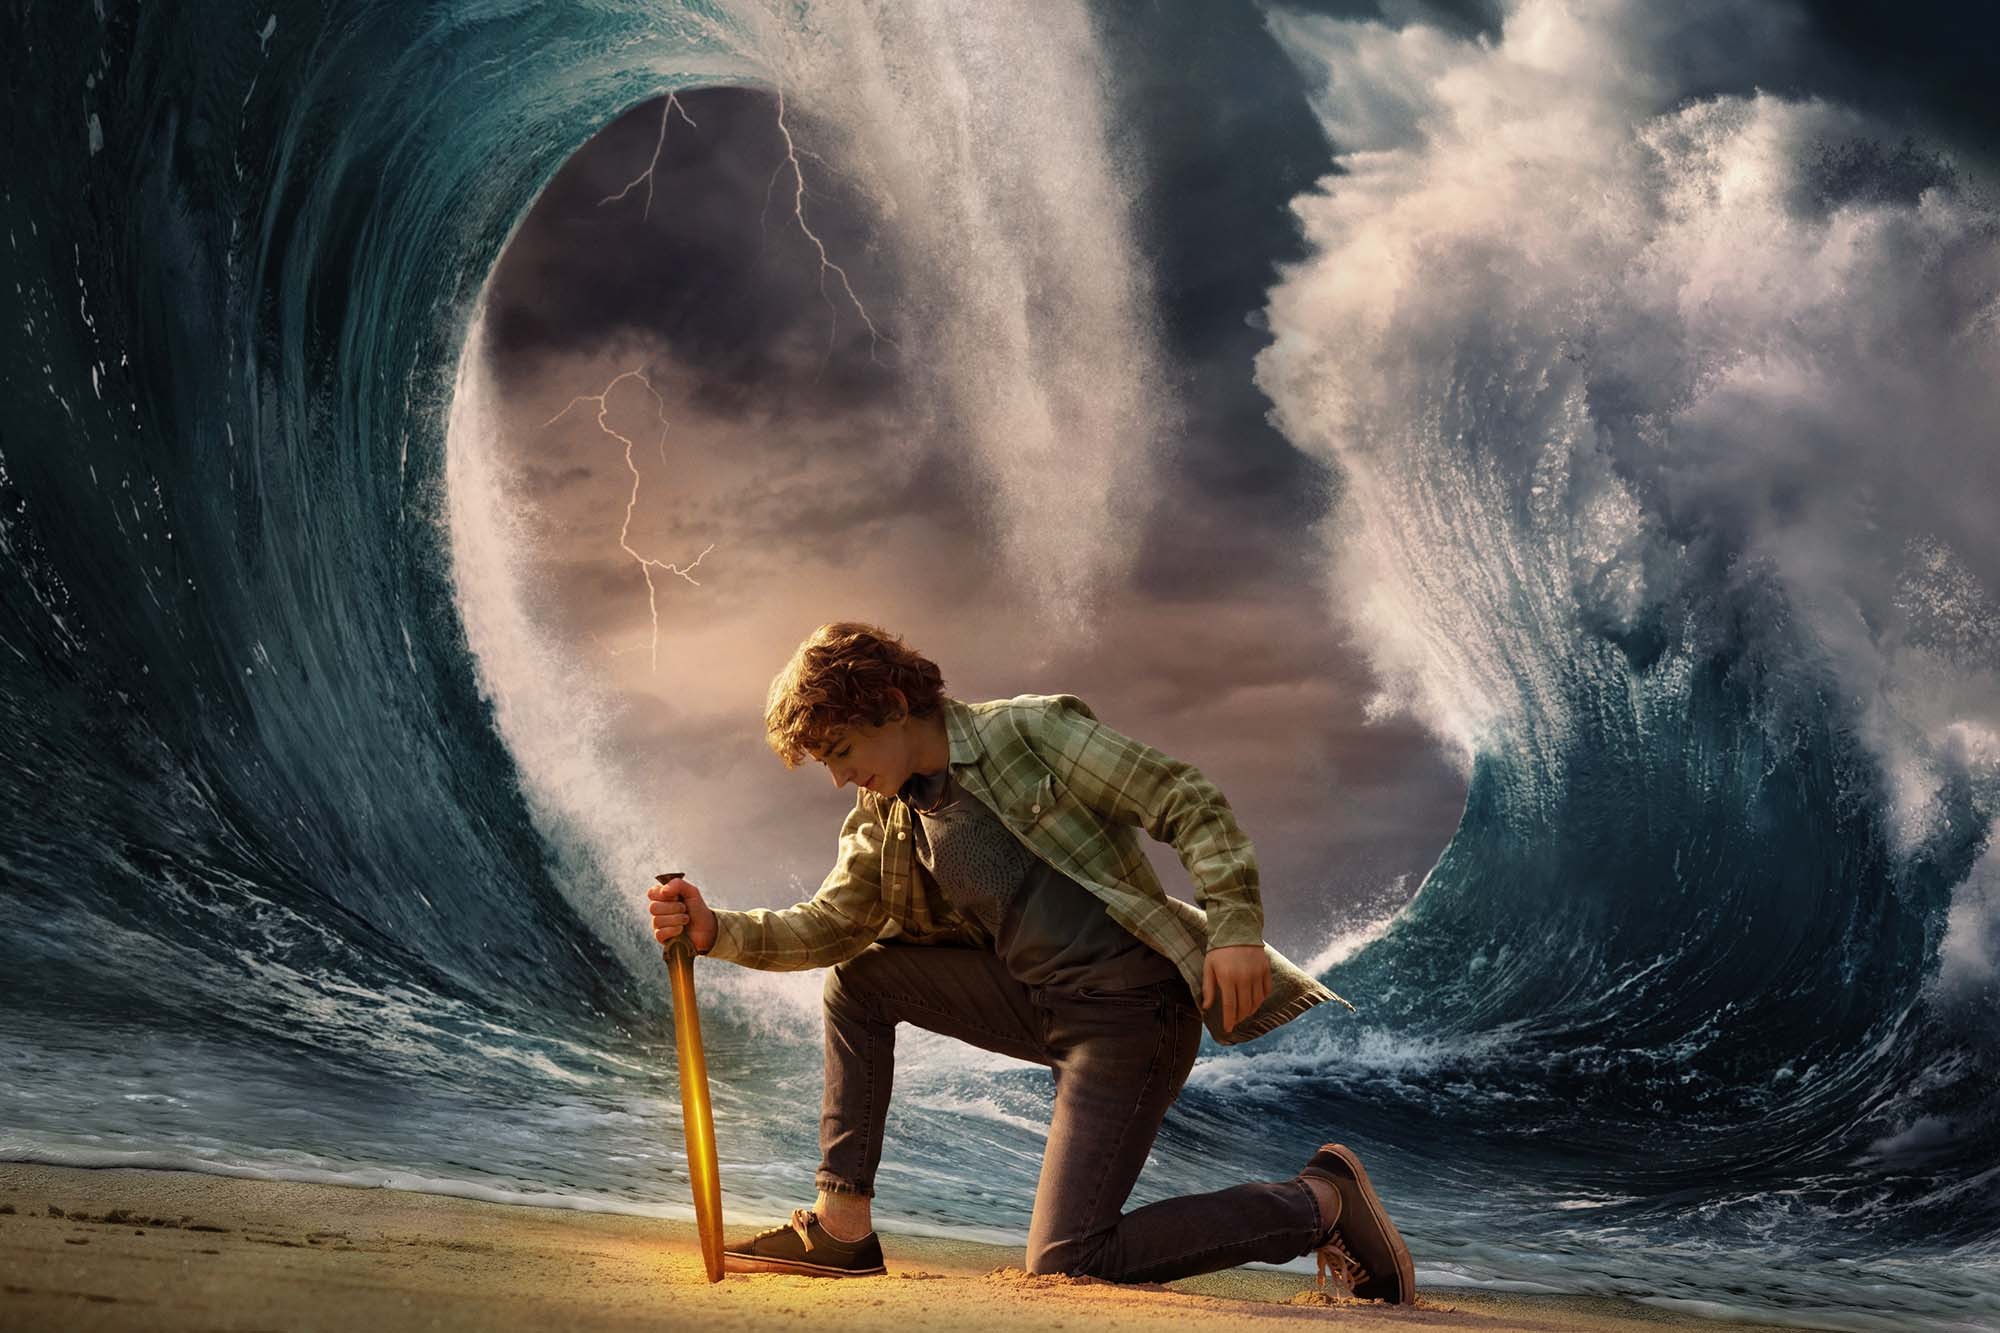 Percy Jackson kneels down and holds a glowing sword to the ground as giant ocean waves rise behind him